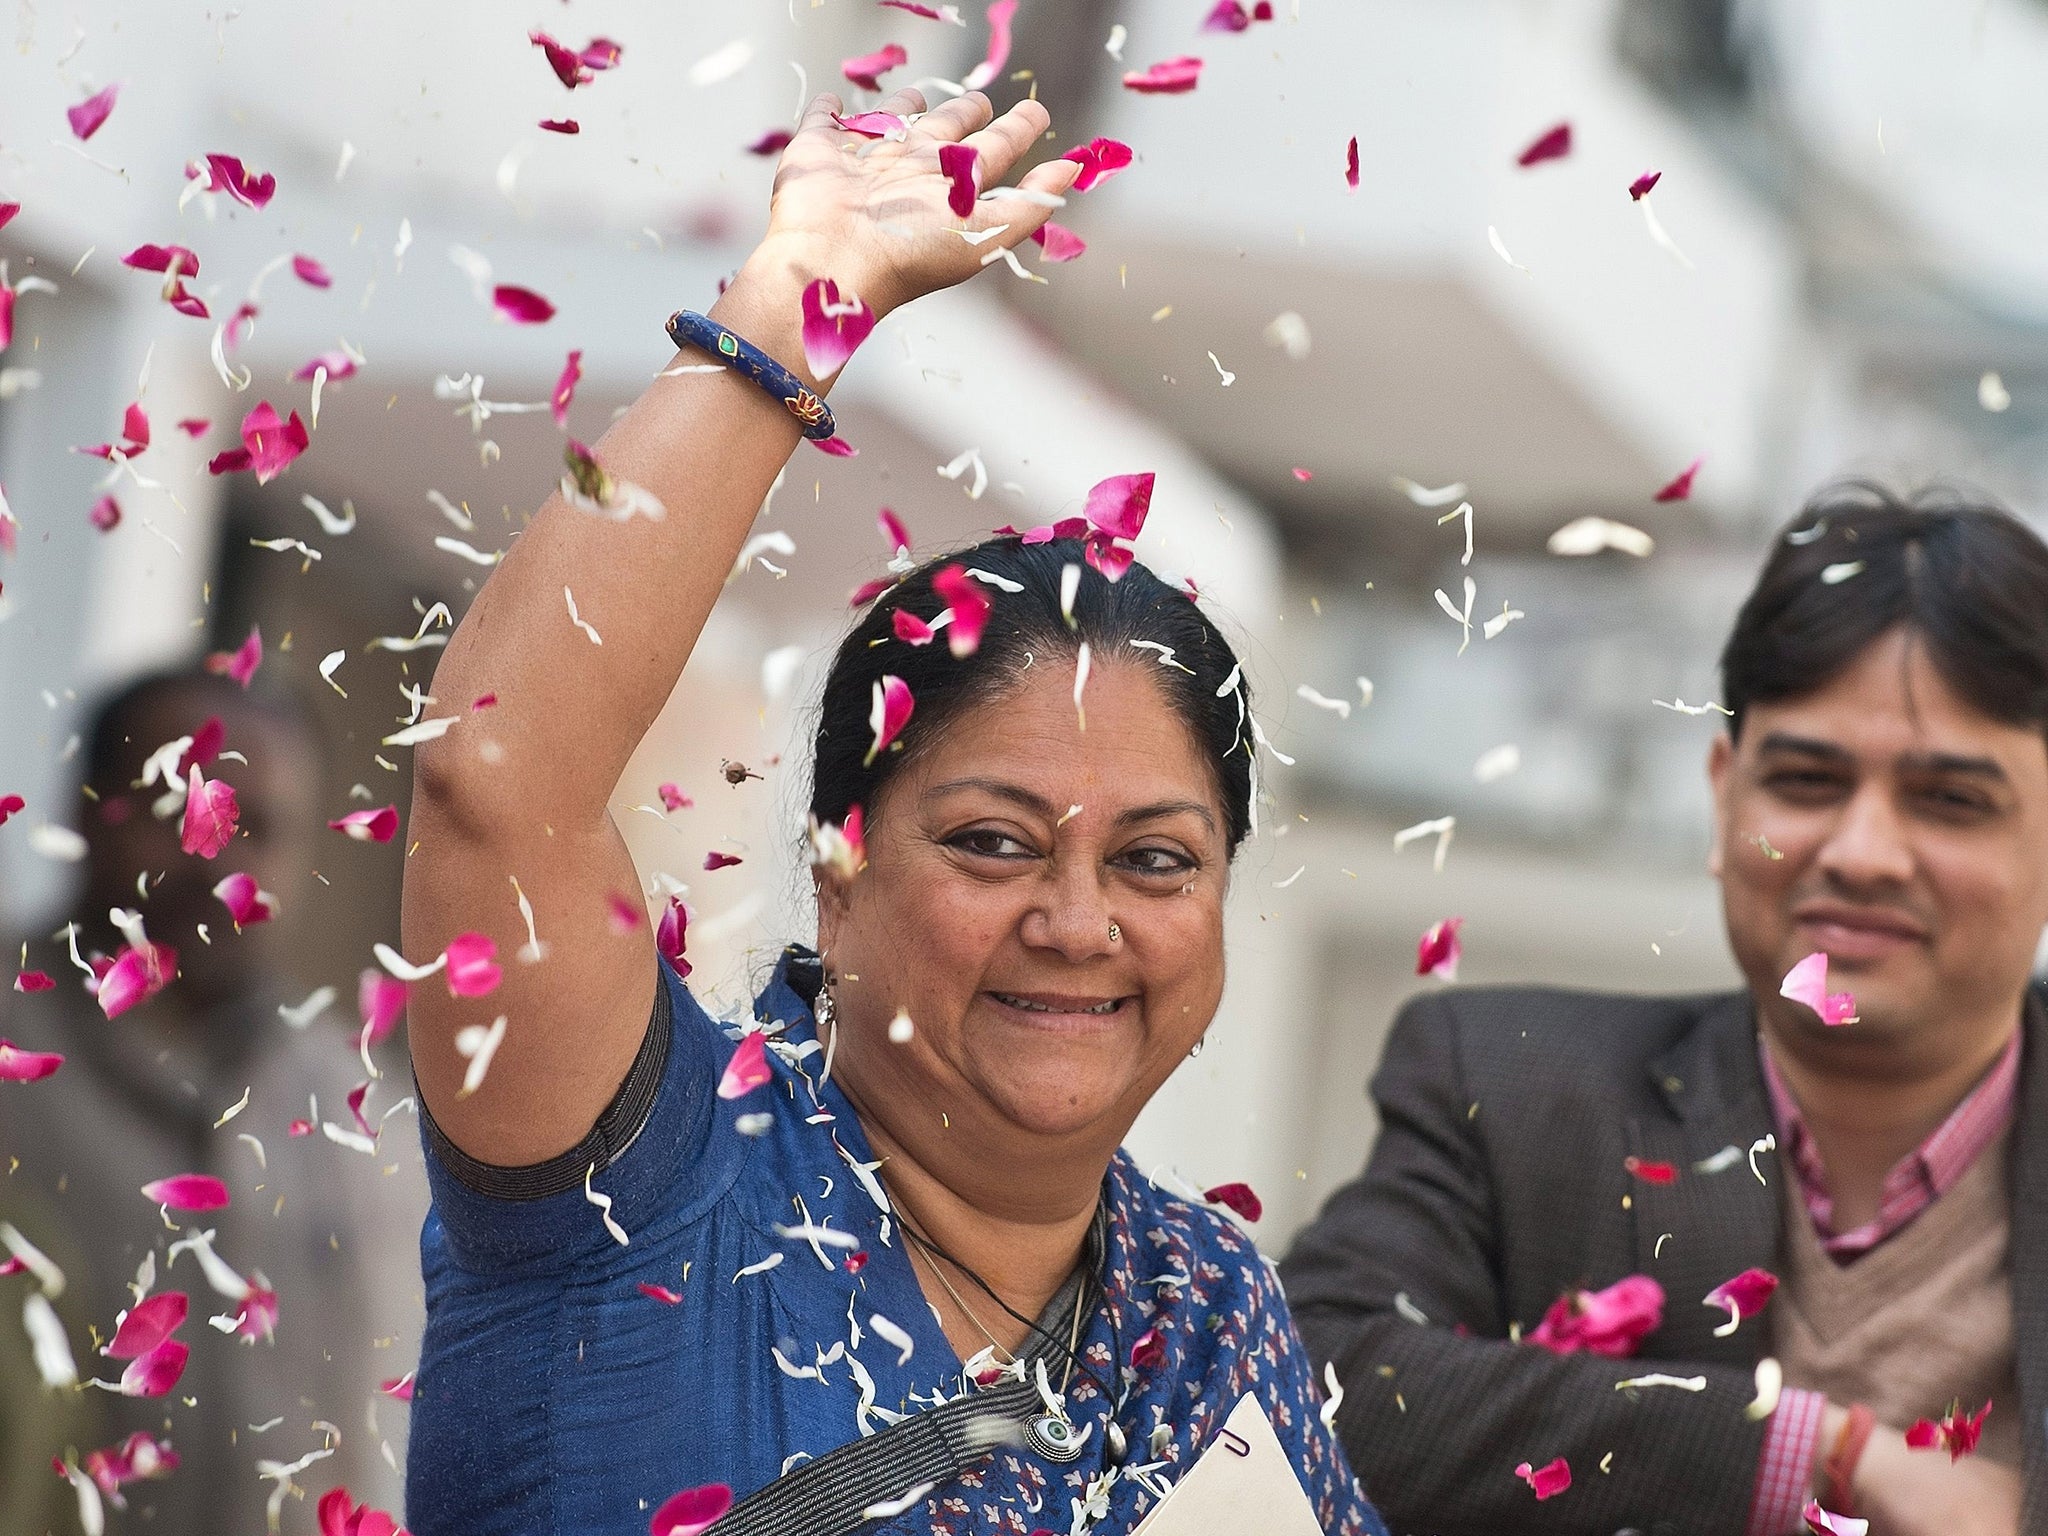 The proposal would require the backing of the state’s chief minister Vasundhara Raje